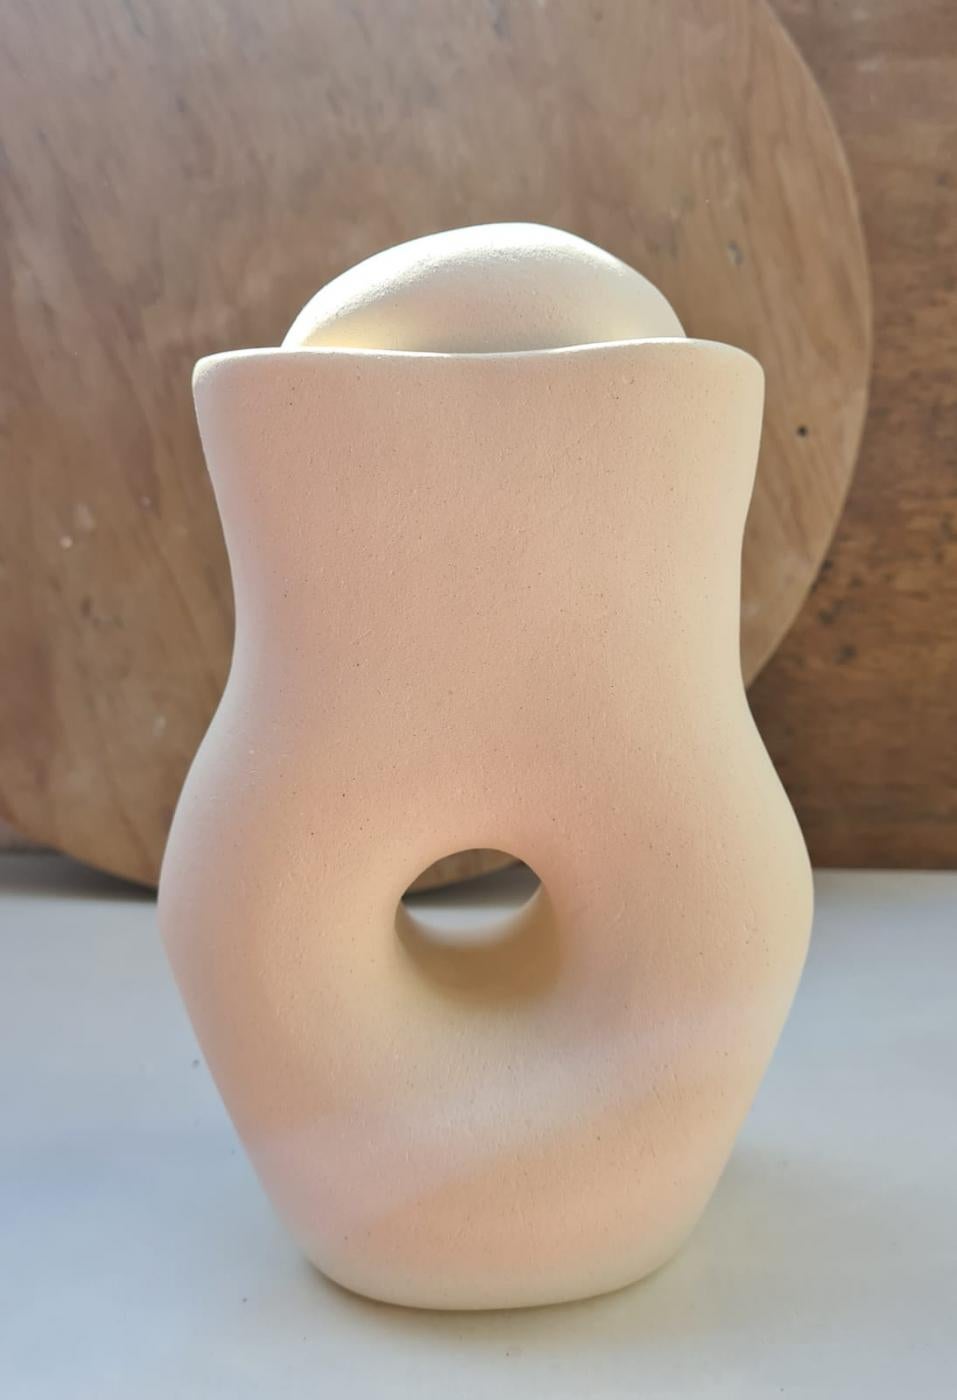 Hybrids Series

Before she started creating her vases / sculptures, ceramicist Alice Aroeira sculpted many matriarchs, deeply feminine figures who, for her, represented the connection between women and the earth and the fertile potential shared by